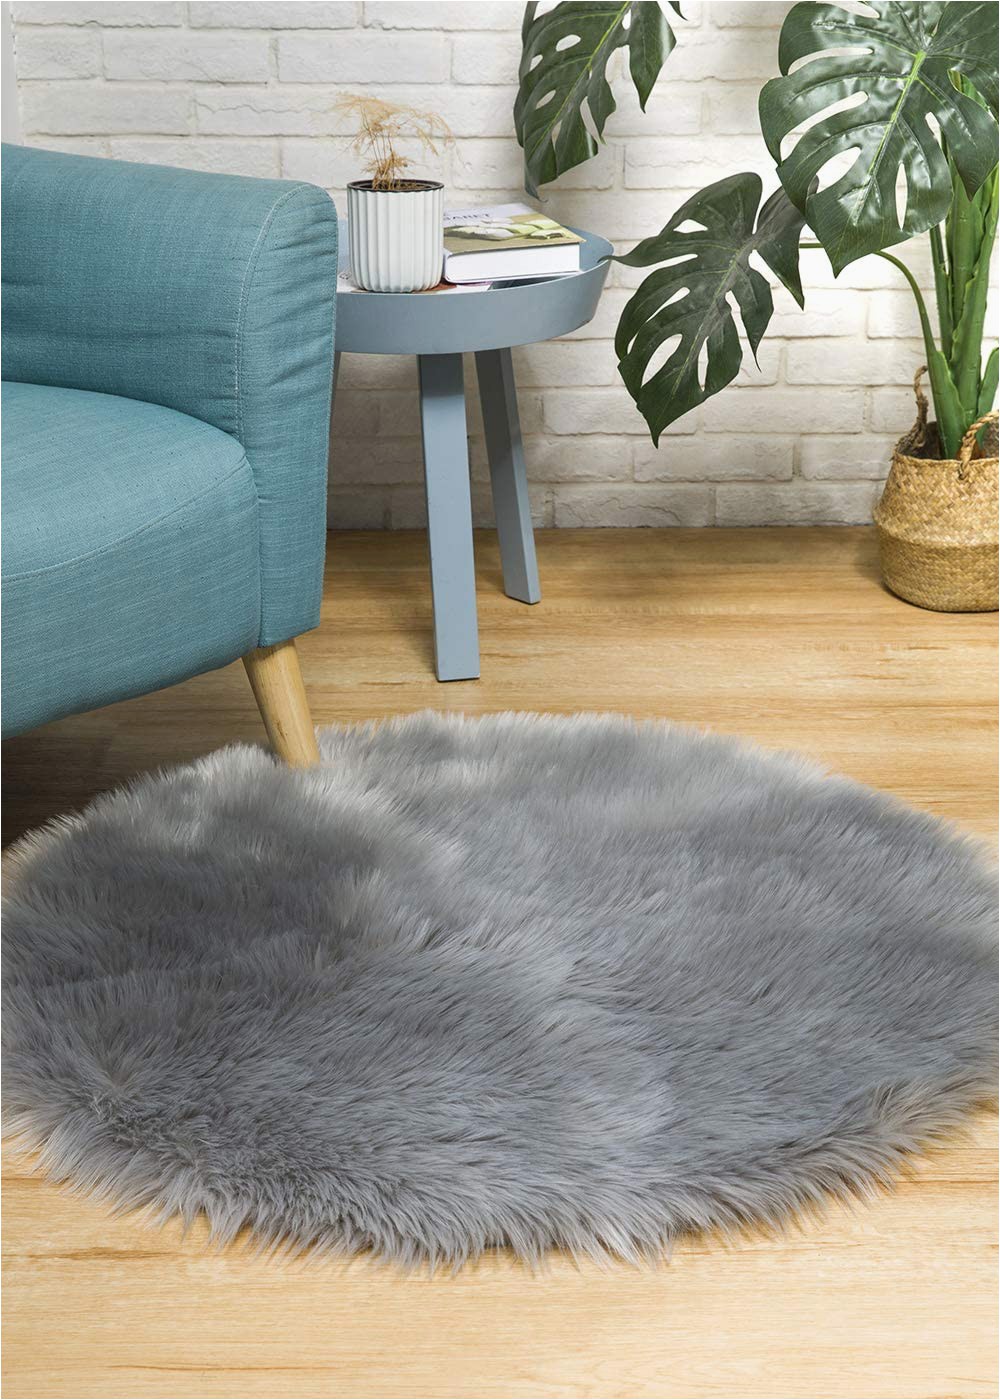 Grey area Rug for Bedroom Ciicool soft Faux Sheepskin Fur area Rugs Fluffy Rugs for Bedroom Silky Fuzzy Carpet Furry Rug for Living Room Girls Rooms Grey Round 3 X 3 Feet